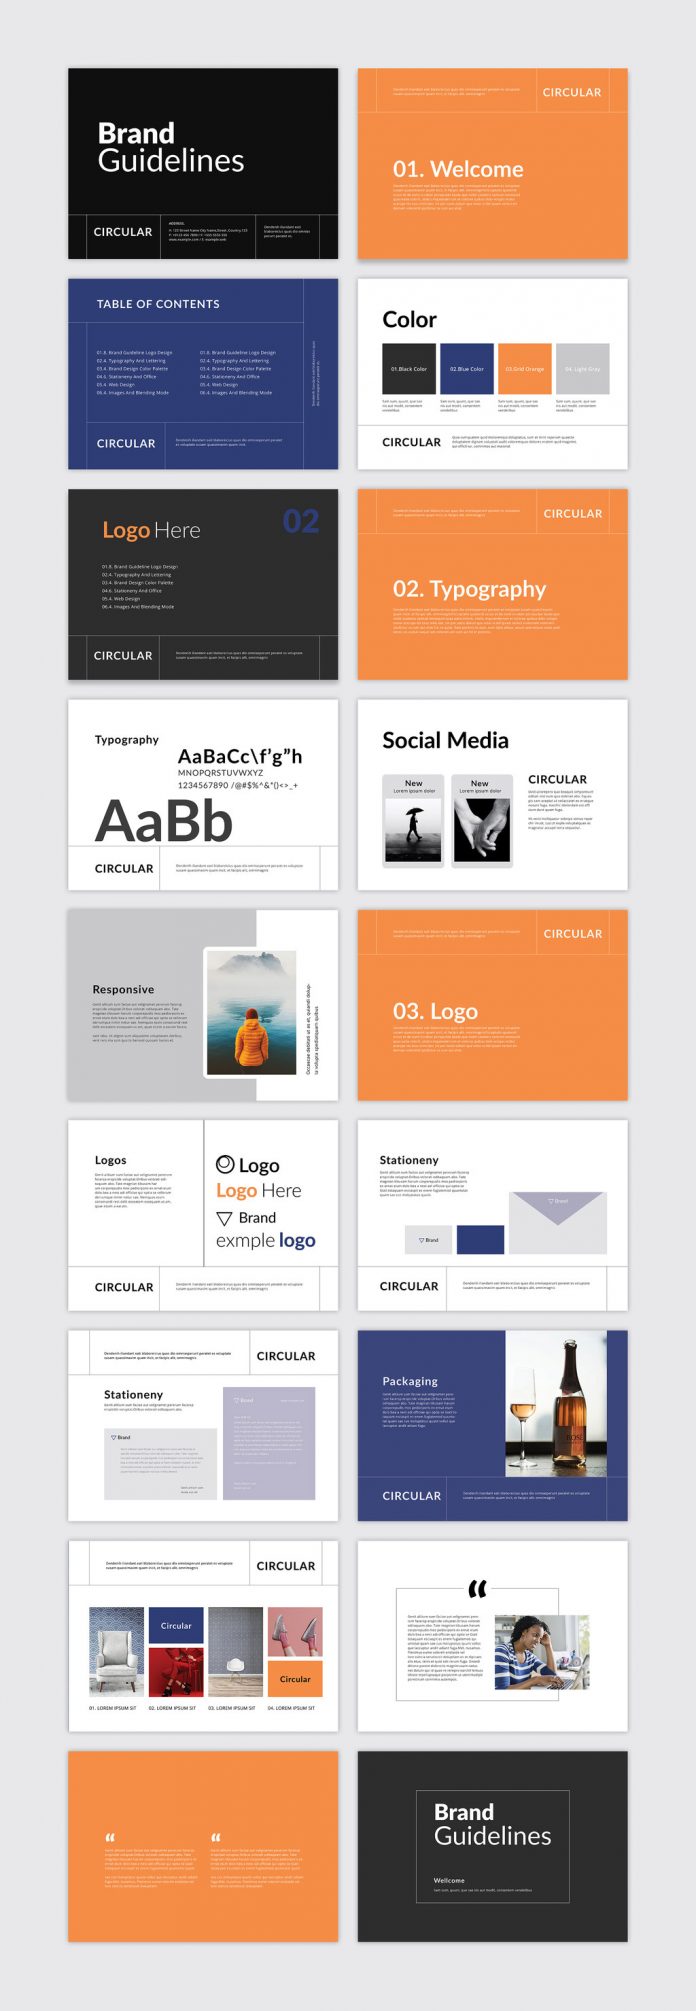 Brand Guidelines Template by PixWork